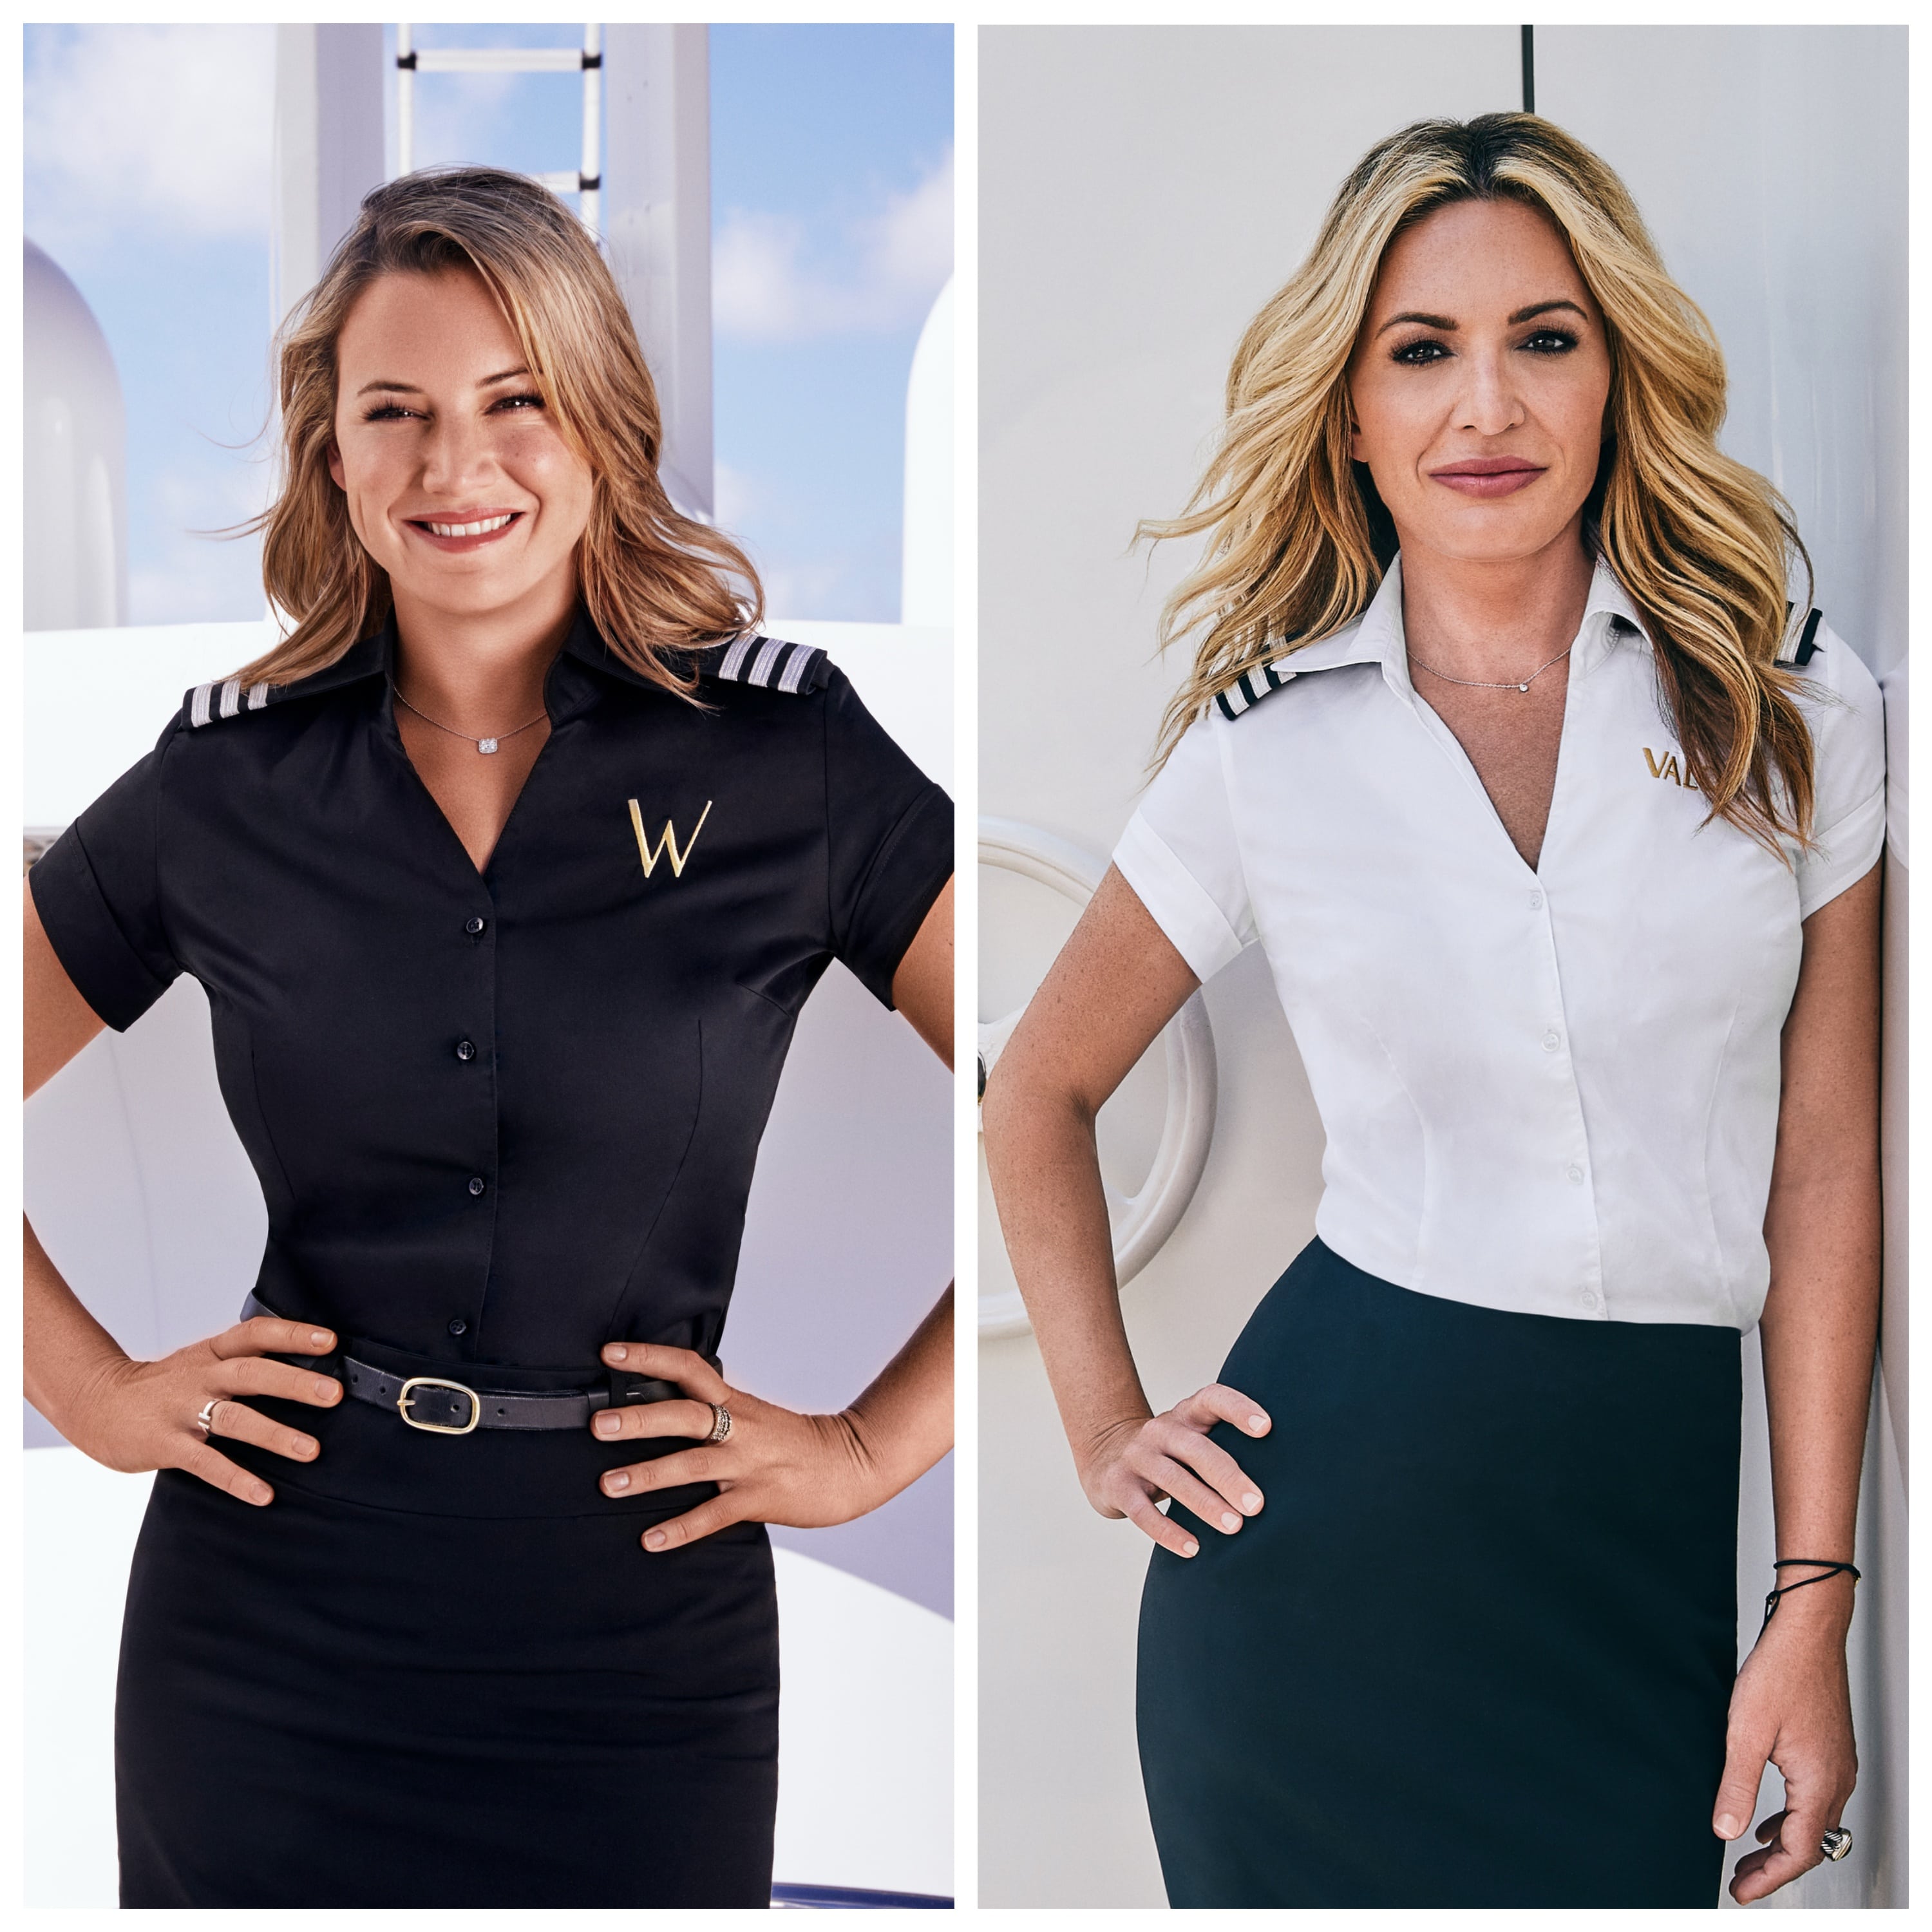 Hannah Ferrier and Kate Chastain 'Below Deck' cast photos